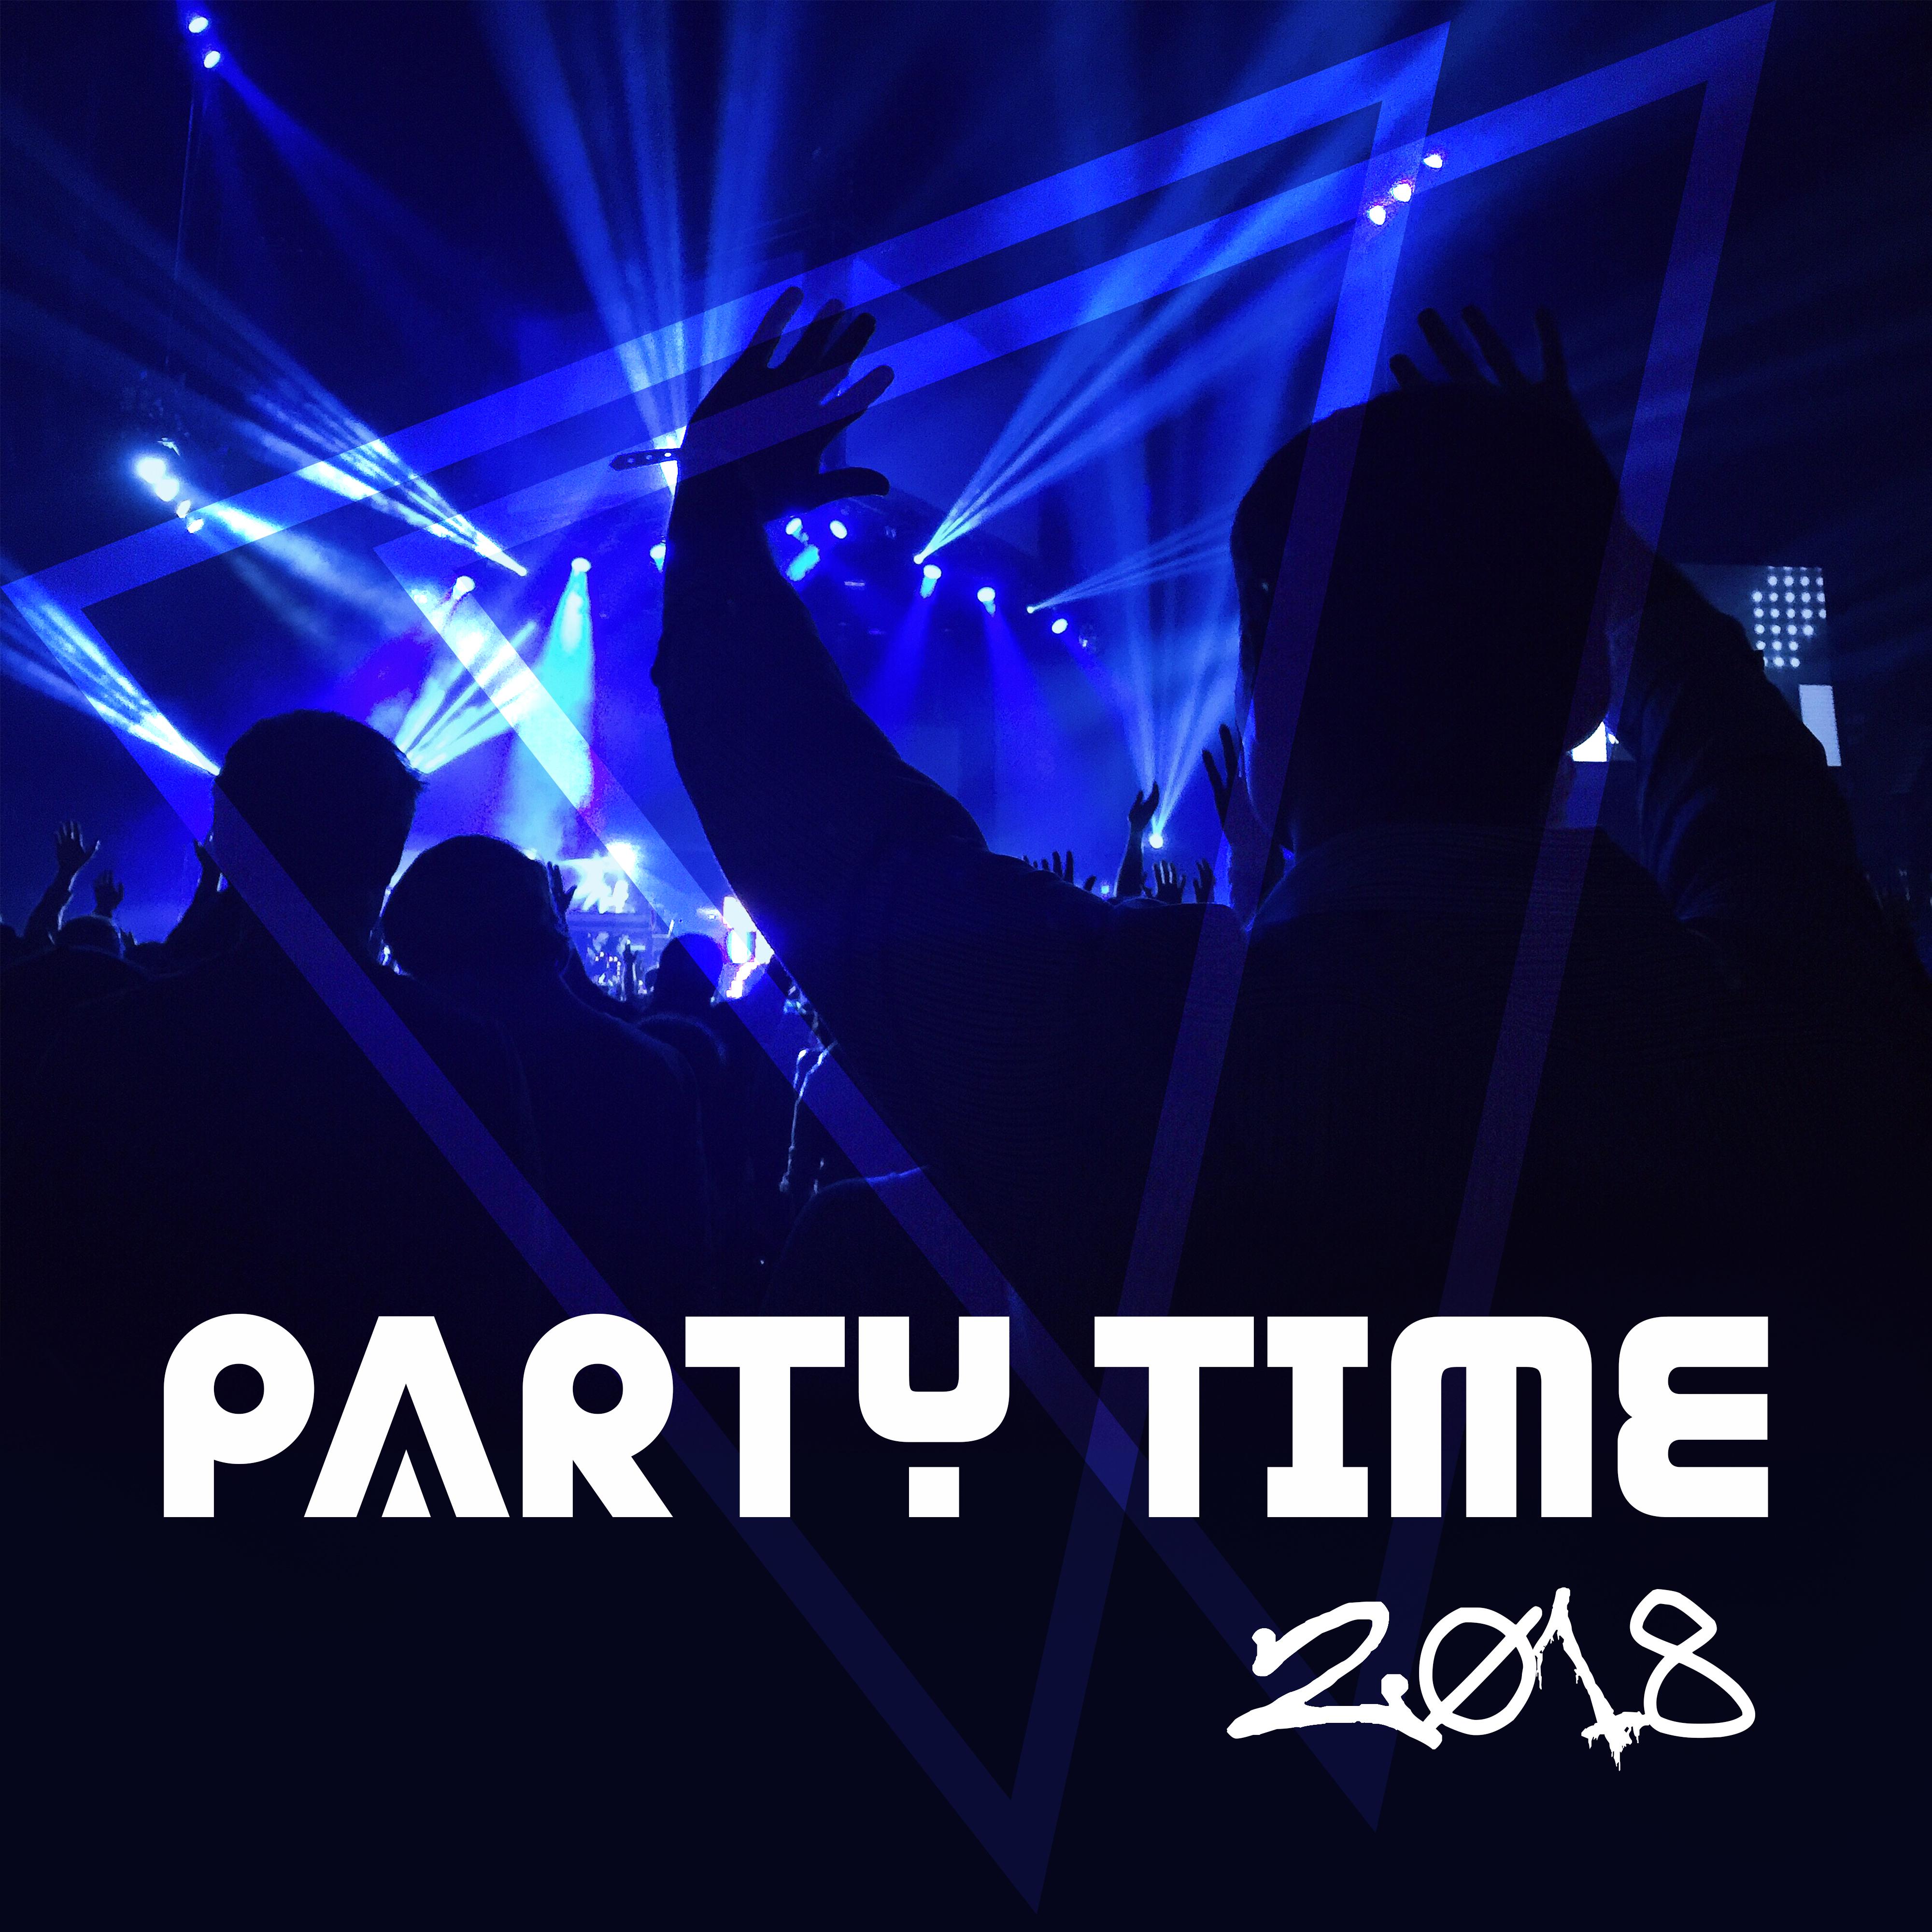 Party Time 2018